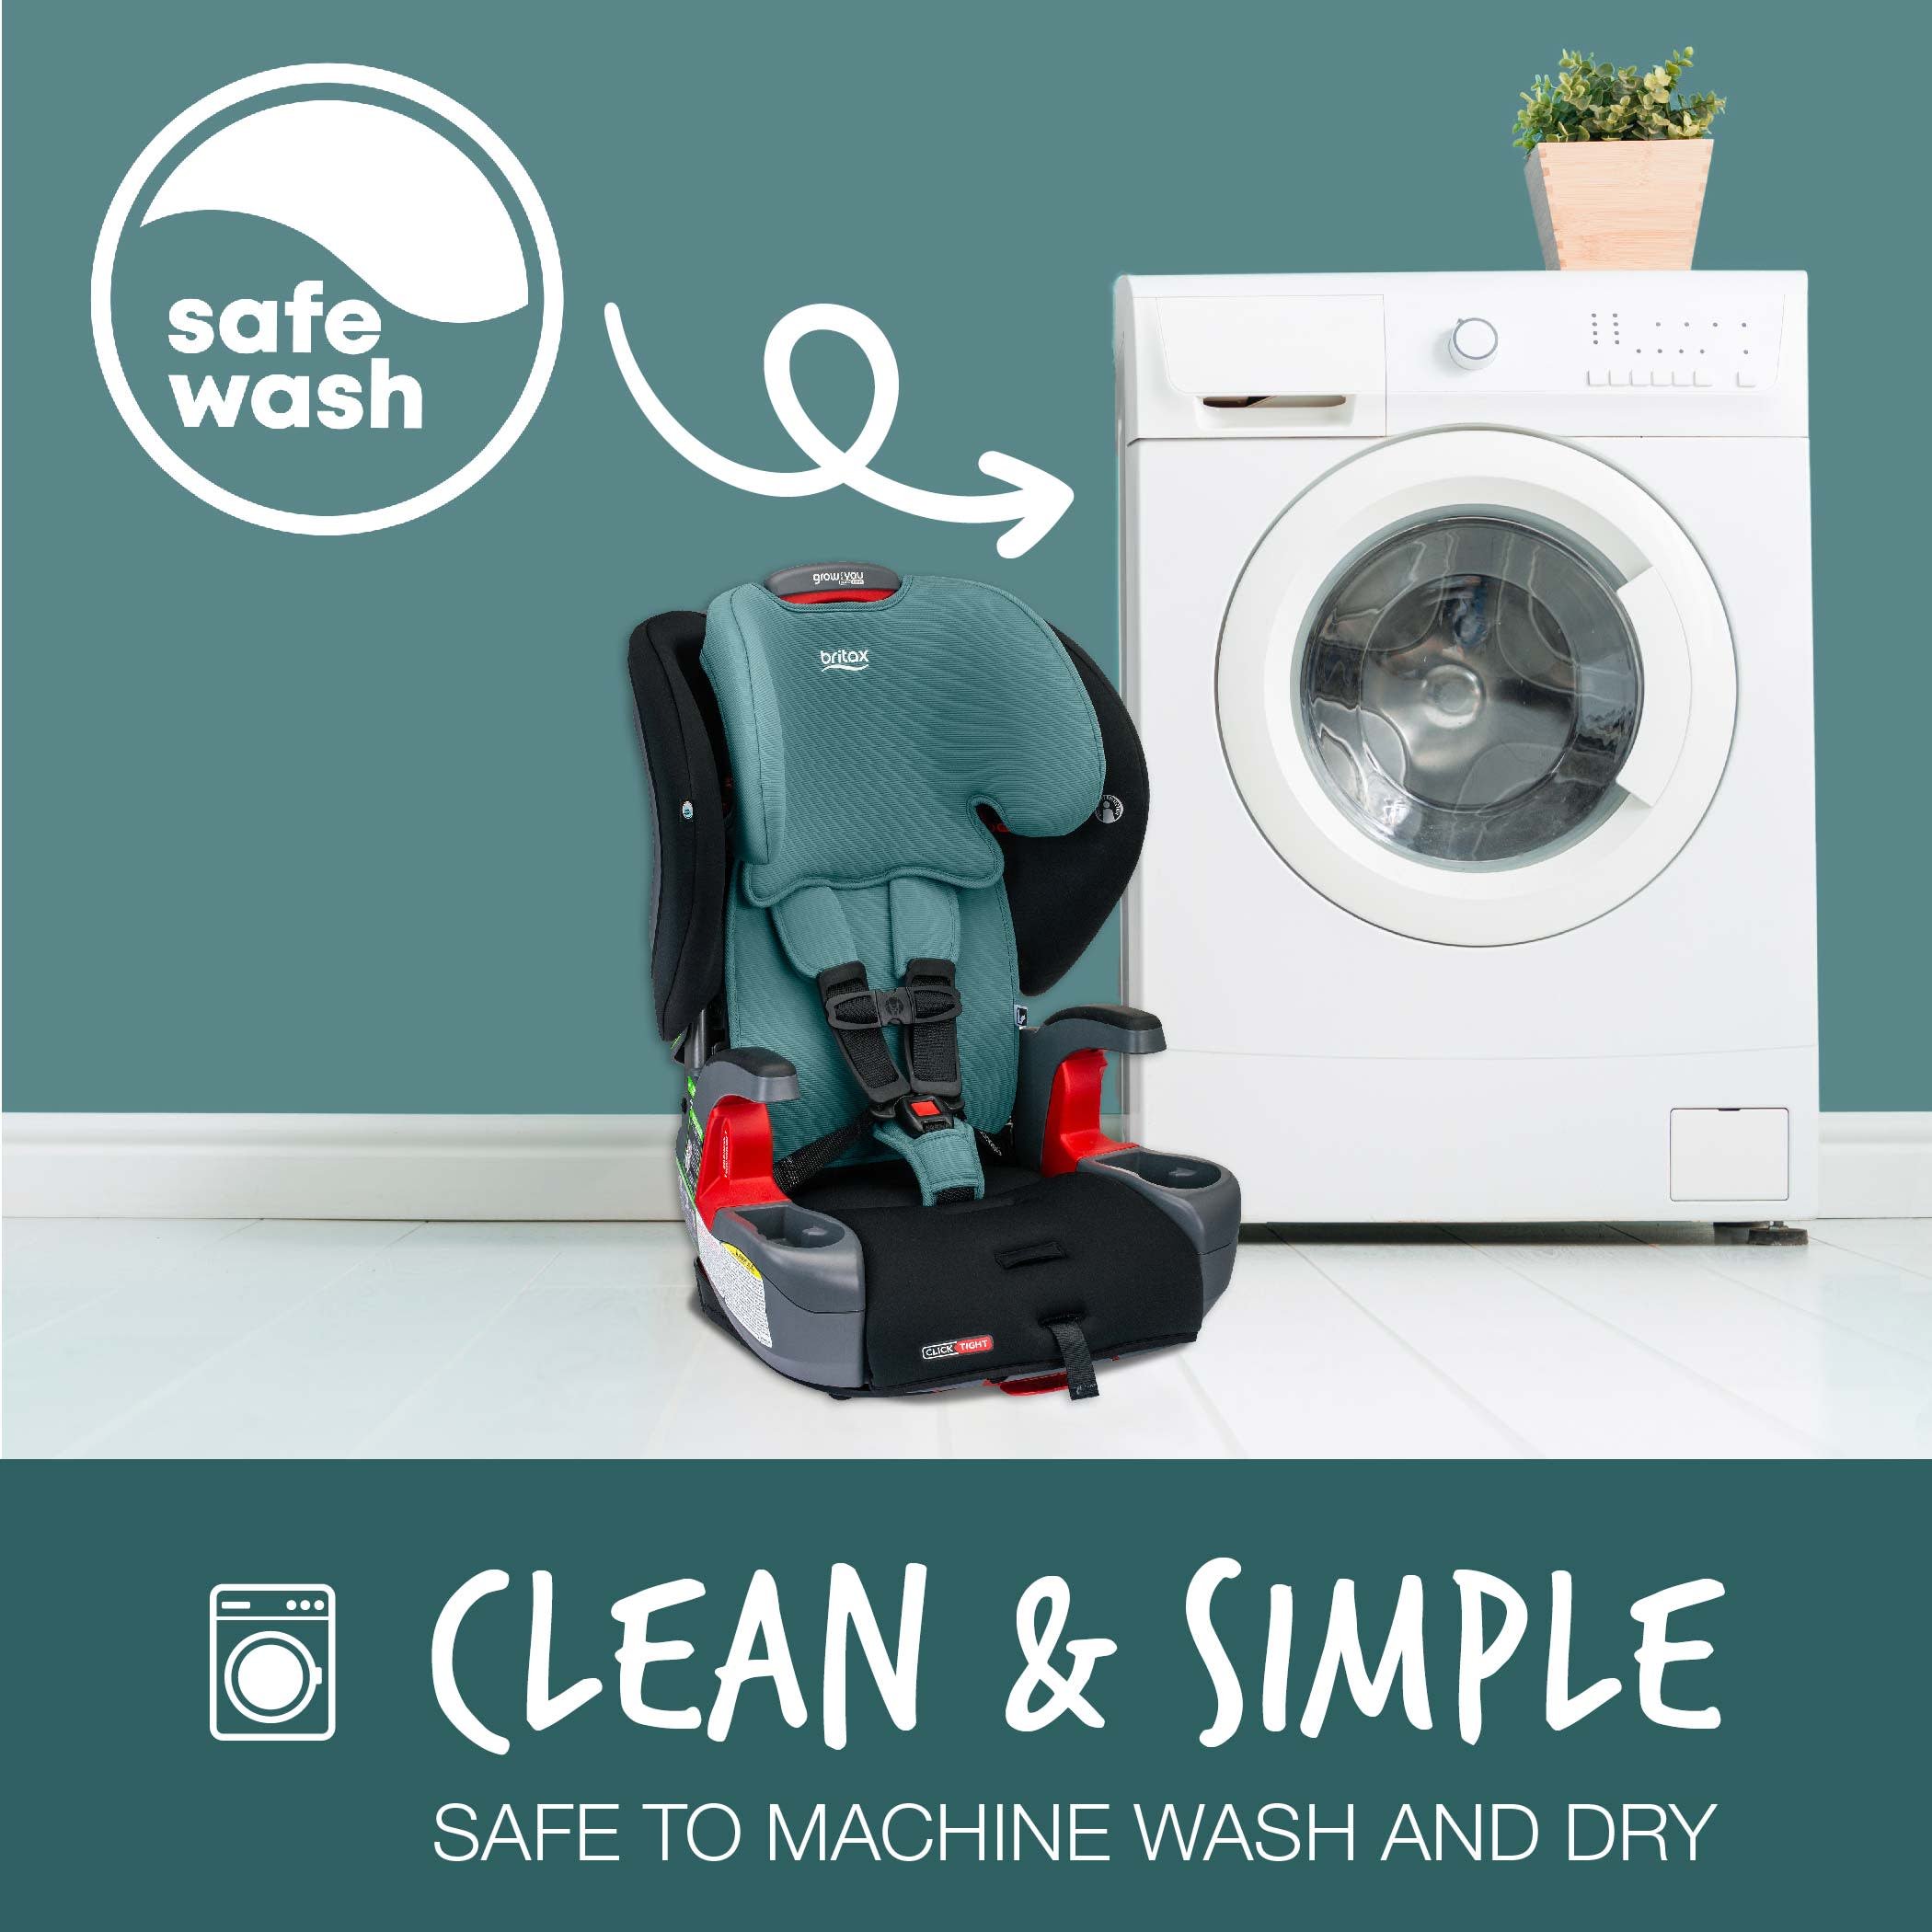 Green Contour Grow With You ClickTight Car Seat next to a washing machine (Copy)